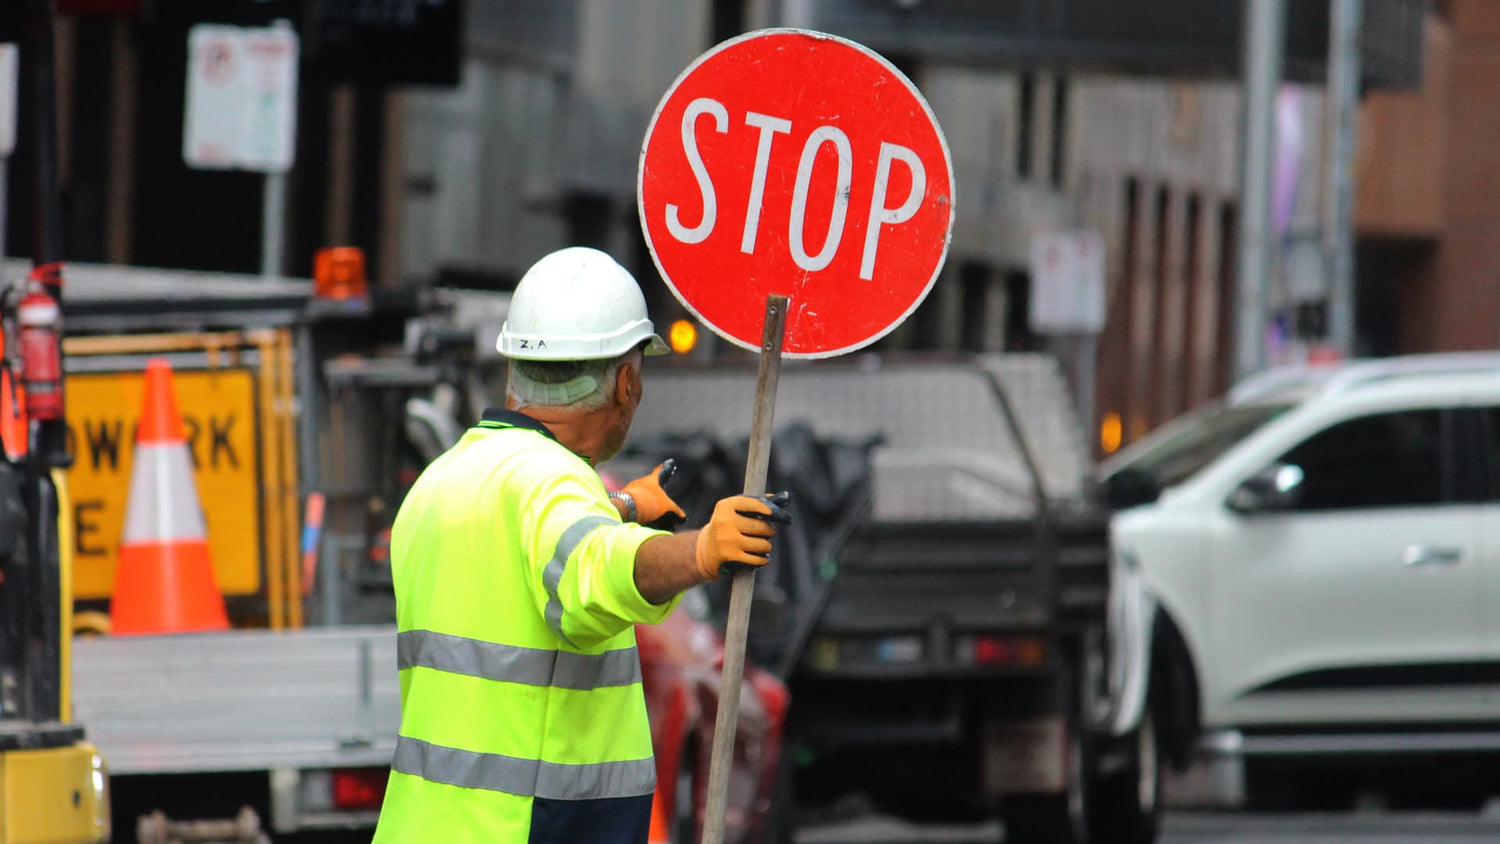 Work zone & traffic control stop sign